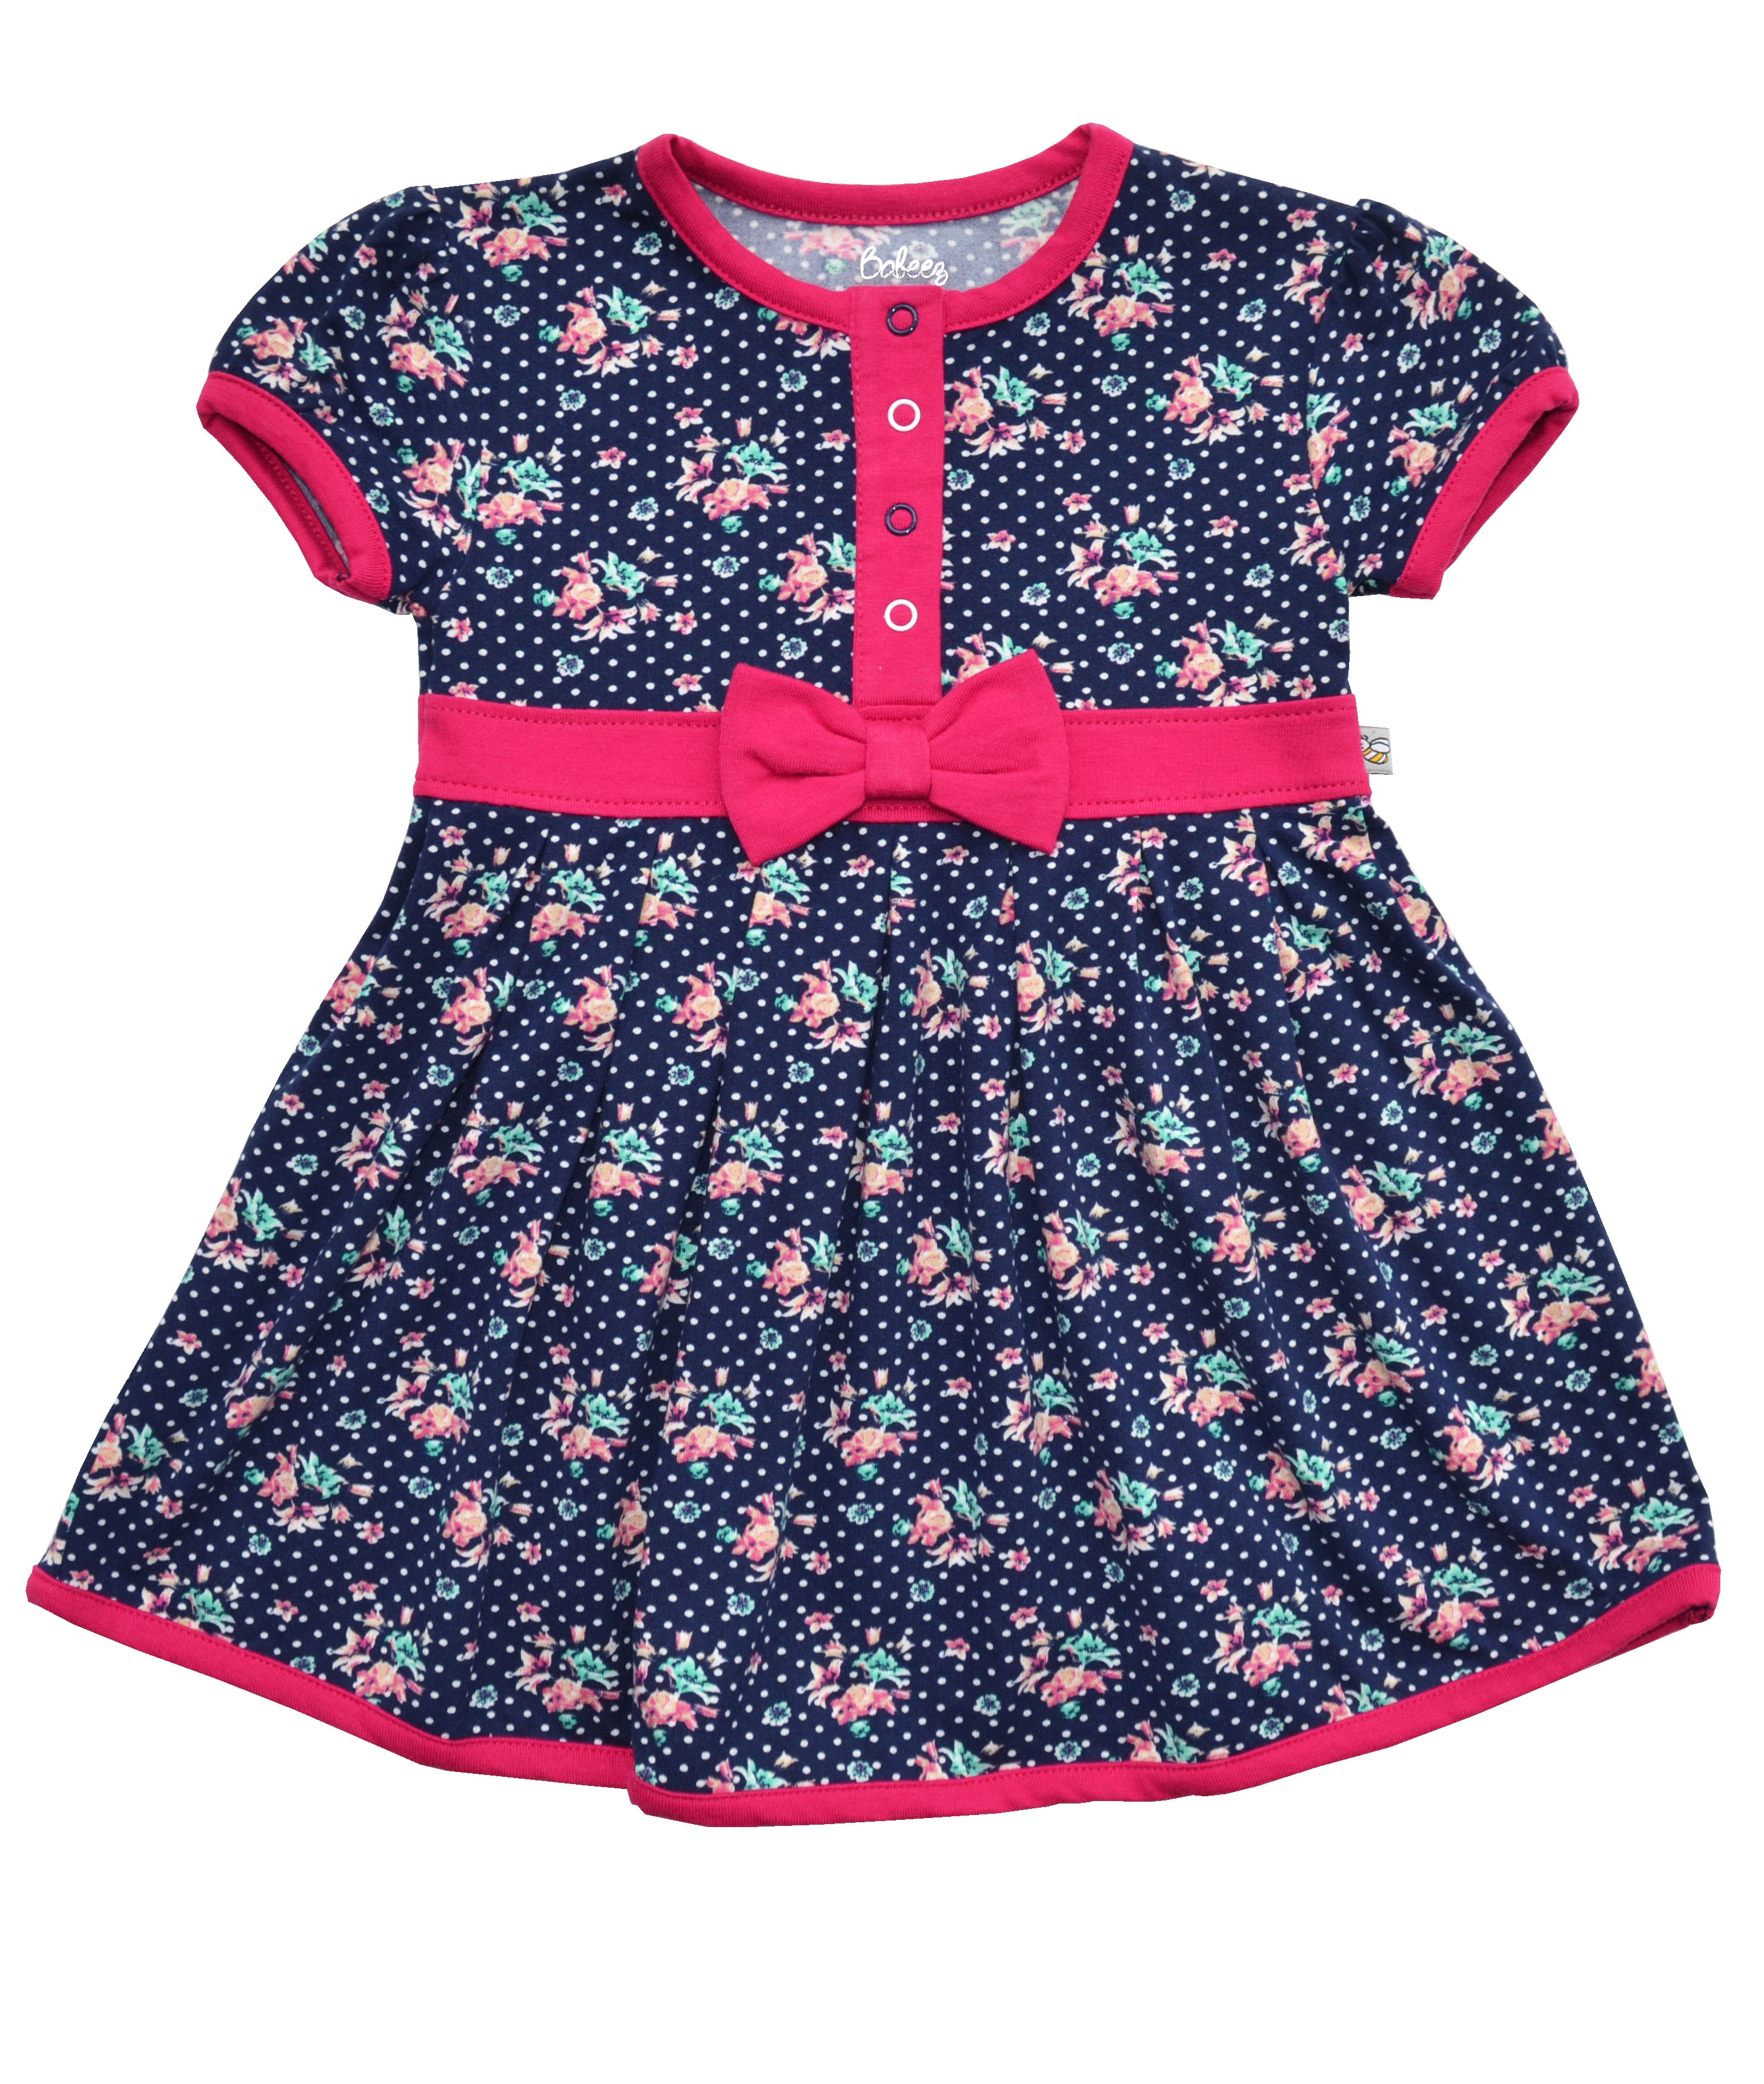 Allover Flower Print on Navy Dress with Pink Bow (95% Cotton 5% Elasthan Jersey)